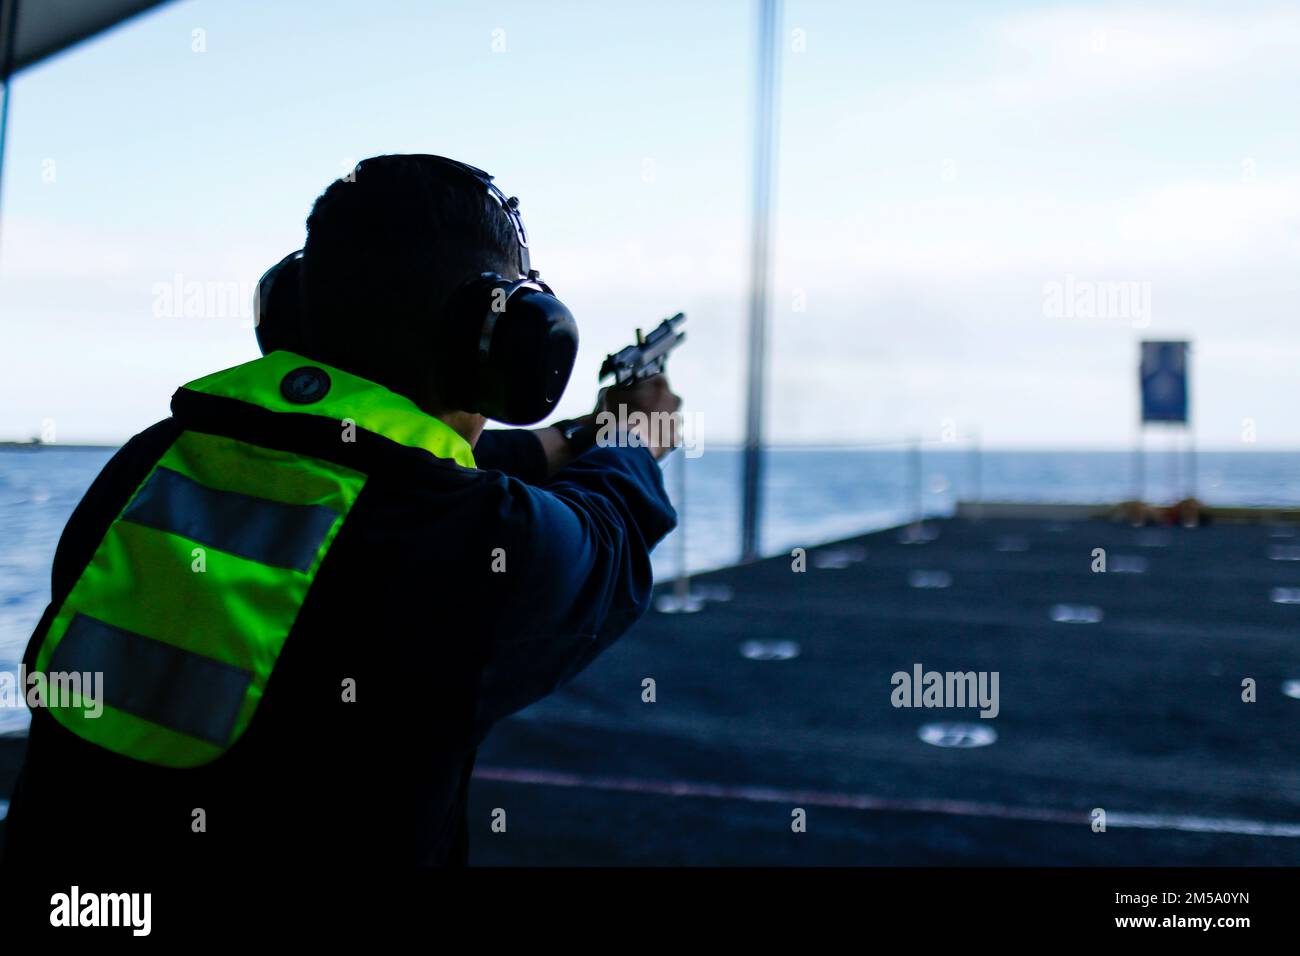 PHILIPPINE SEA (Feb. 13, 2022) Logistics Specialist Seaman Thomas Balderas, from Boerne, Texas, fires an M9 service pistol during a weapons qualification shoot aboard the Nimitz-class aircraft carrier USS Abraham Lincoln (CVN 72). Abraham Lincoln Strike Group is on a scheduled deployment in the U.S. 7th Fleet area of operations to enhance interoperability through alliances and partnerships while serving as a ready-response force in support of a free and open Indo-Pacific region. Stock Photo